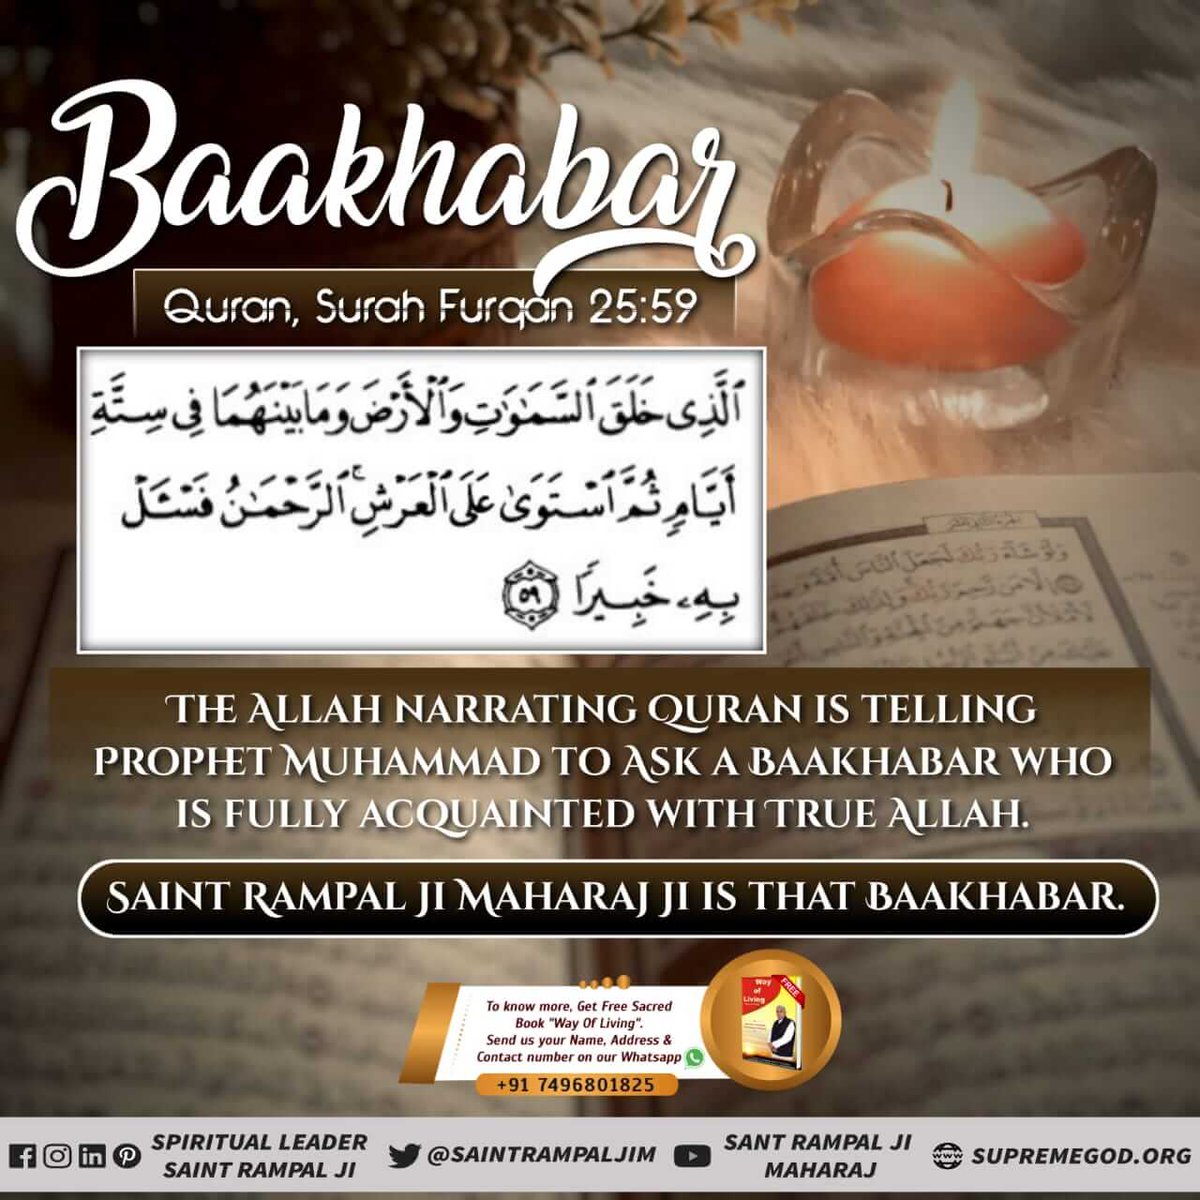 #Baakhabar_In_Quran Muslim religious leaders believe that there is no rebirth. While Bakhabar Saint Rampal Ji showed from Quran Sura Ambiya 21 verse 104 that rebirth happens. The correct information of Allah is only with Saint Rampal Ji Maharaj.